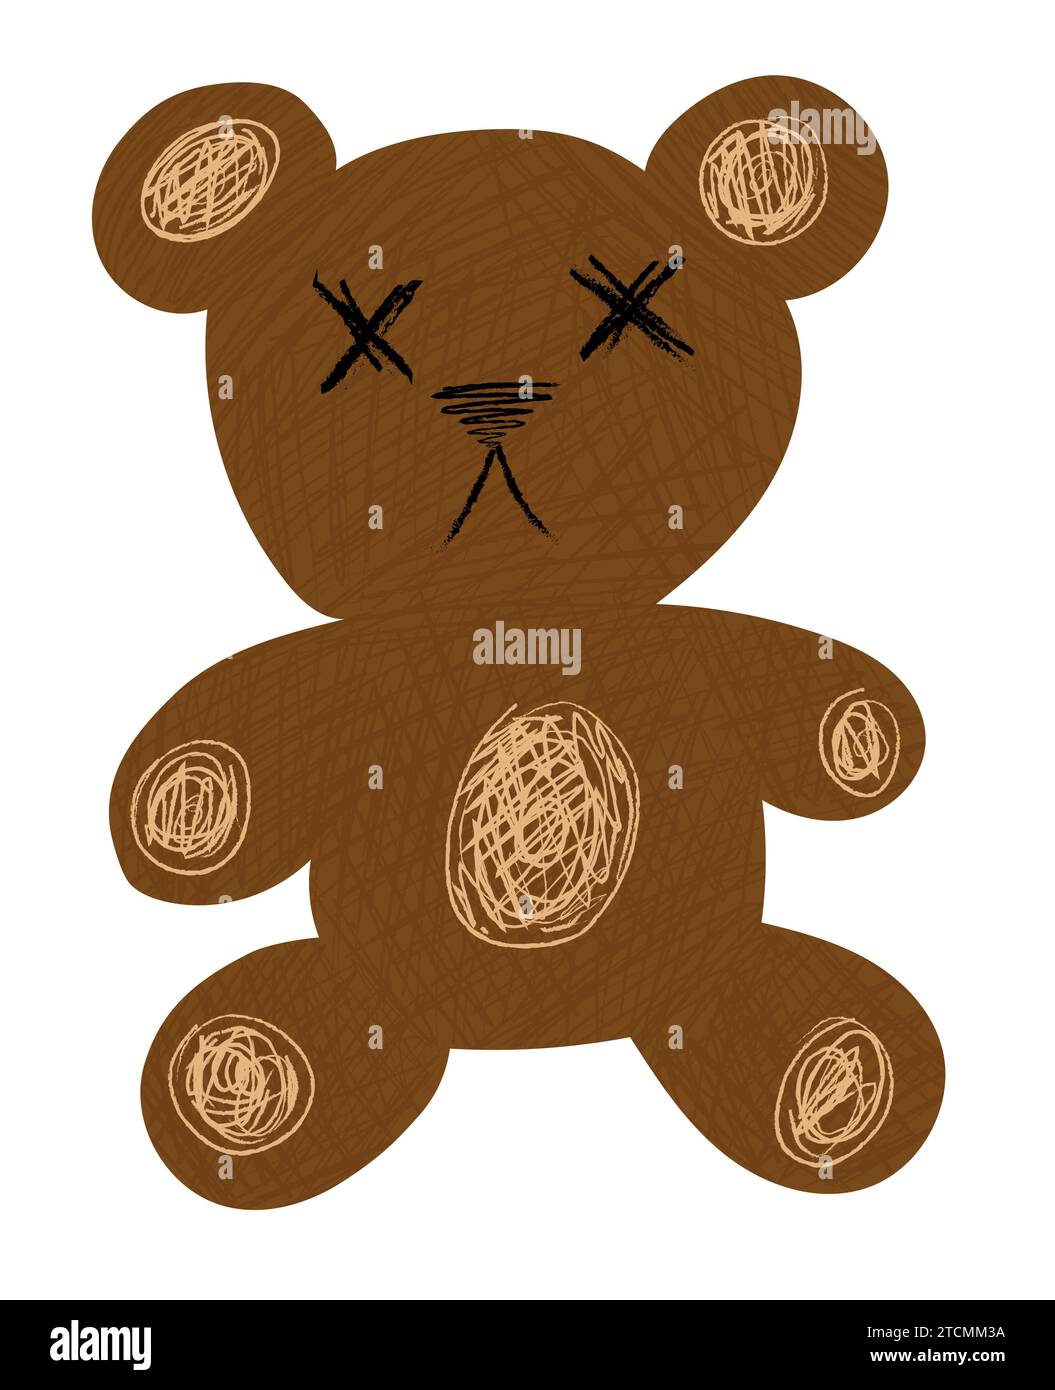 BROWN TEDDY BEAR WITH CROSS EYES, CRAYON PAINTED STYLE Stock Vector